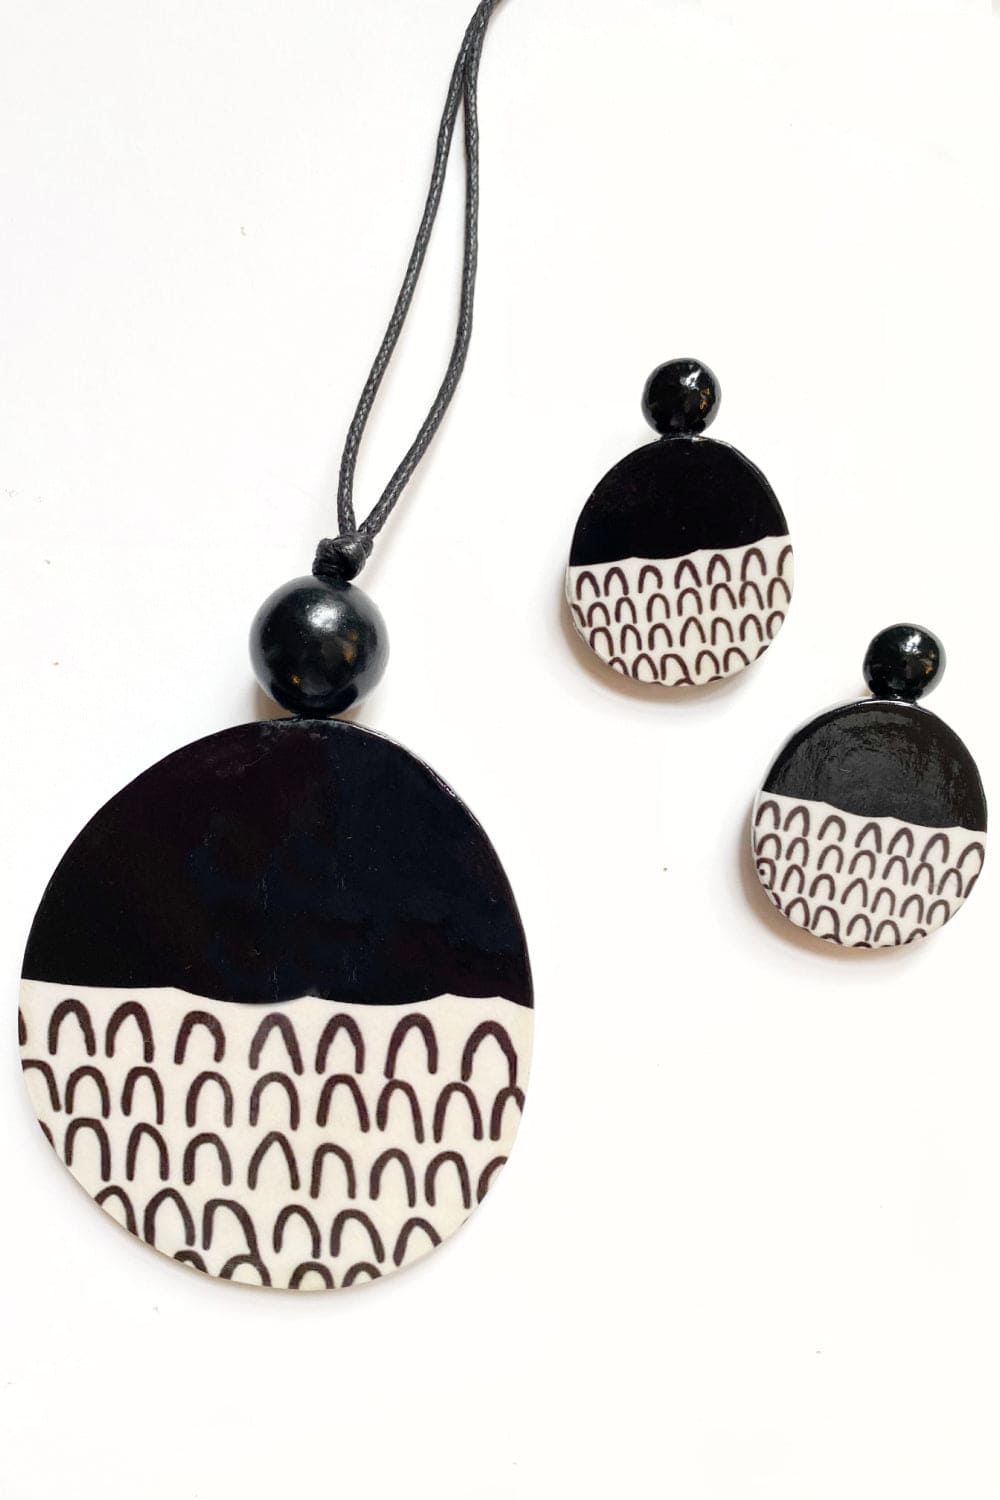 Black and White Decoupage earrings and necklace.